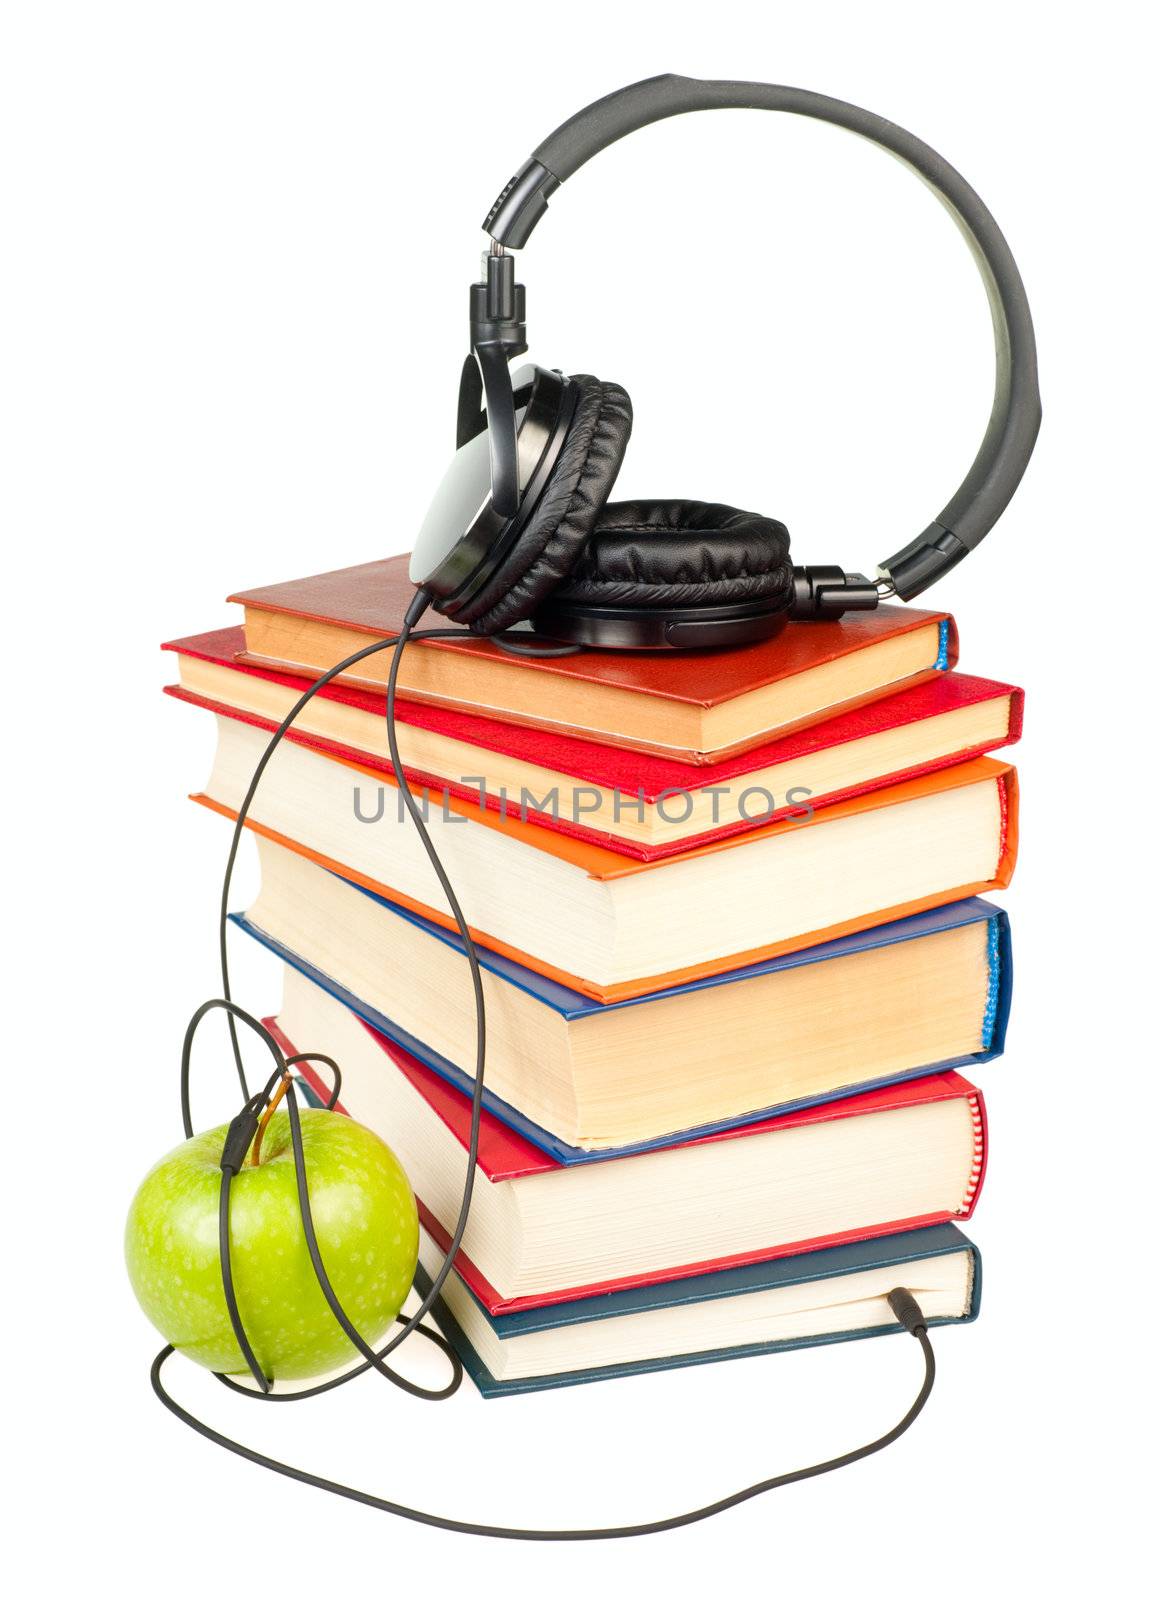 HI-Fi headphones on stack of old books with green apple on white background